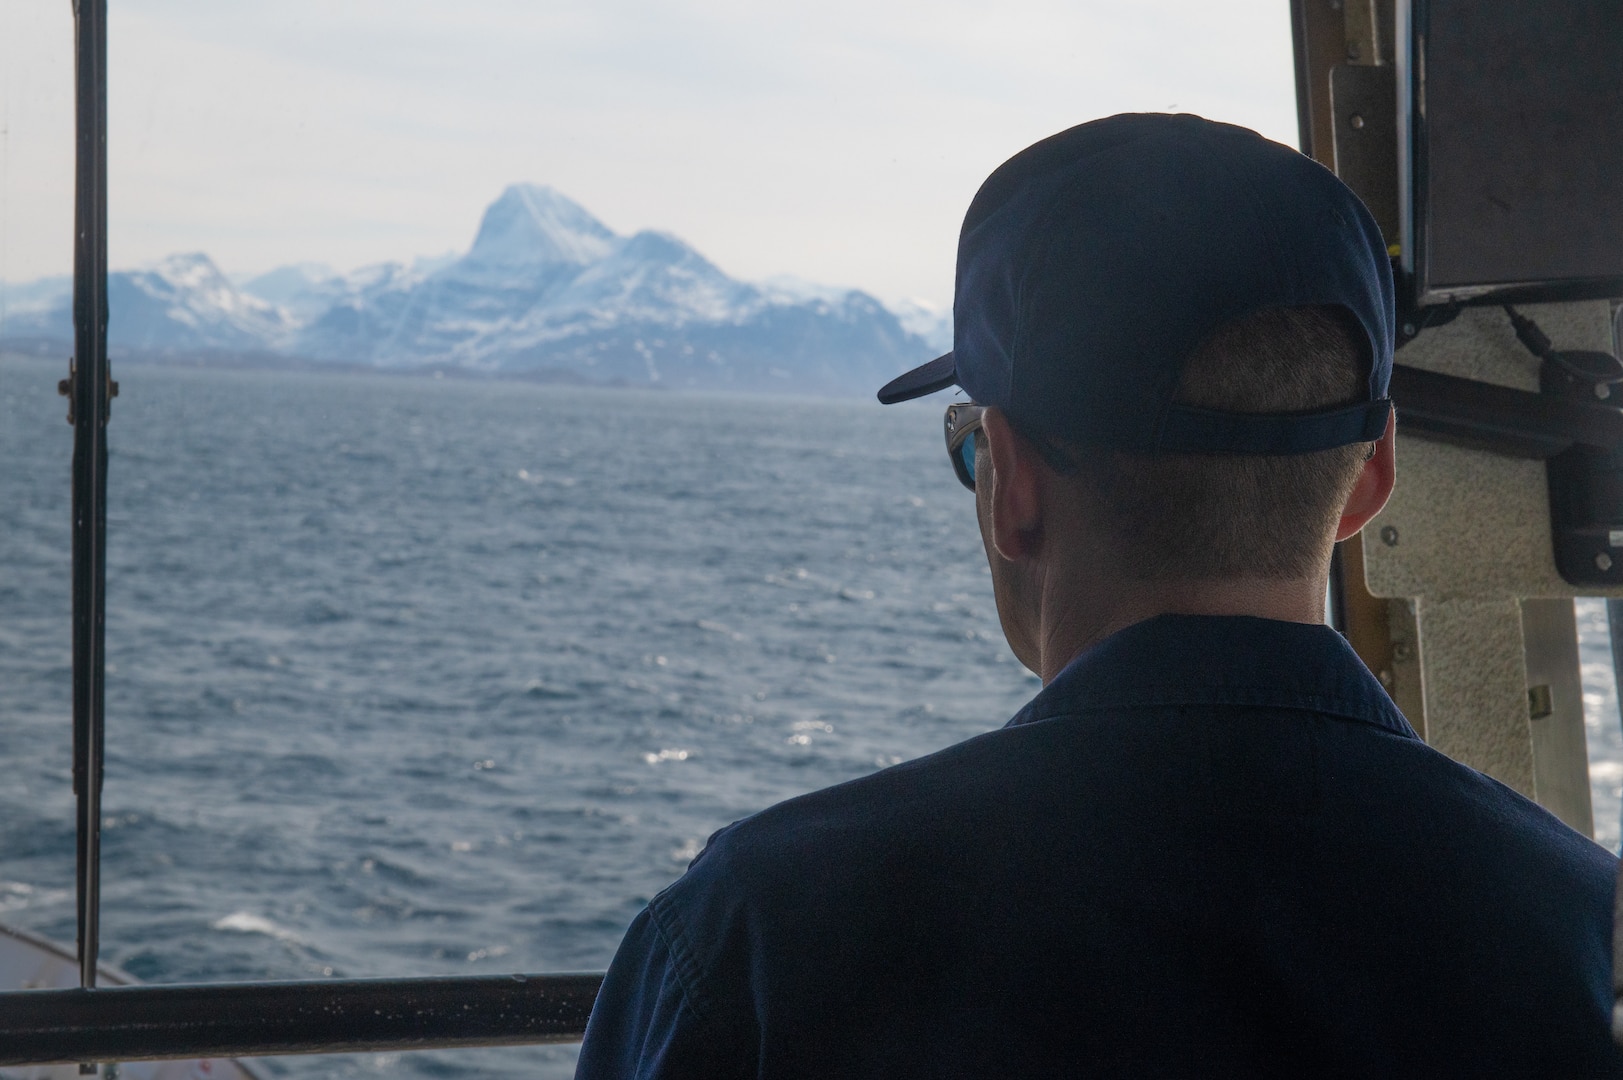 U.S. Coast Guard Cmdr. Chad Conrad, the commanding officer of USCGC Sycamore (WLB 209), supervises on the bridge during the cutter's arrival into Nuuk, Greenland, June 10, 2023. Sycamore is participating in Exercise Argus, a joint search and rescue and marine environmental response exercise that includes assets from the United States, Denmark, Greenland, and France. (U.S. Coast Guard photo by Petty Officer 2nd Class Ryan Schultz)